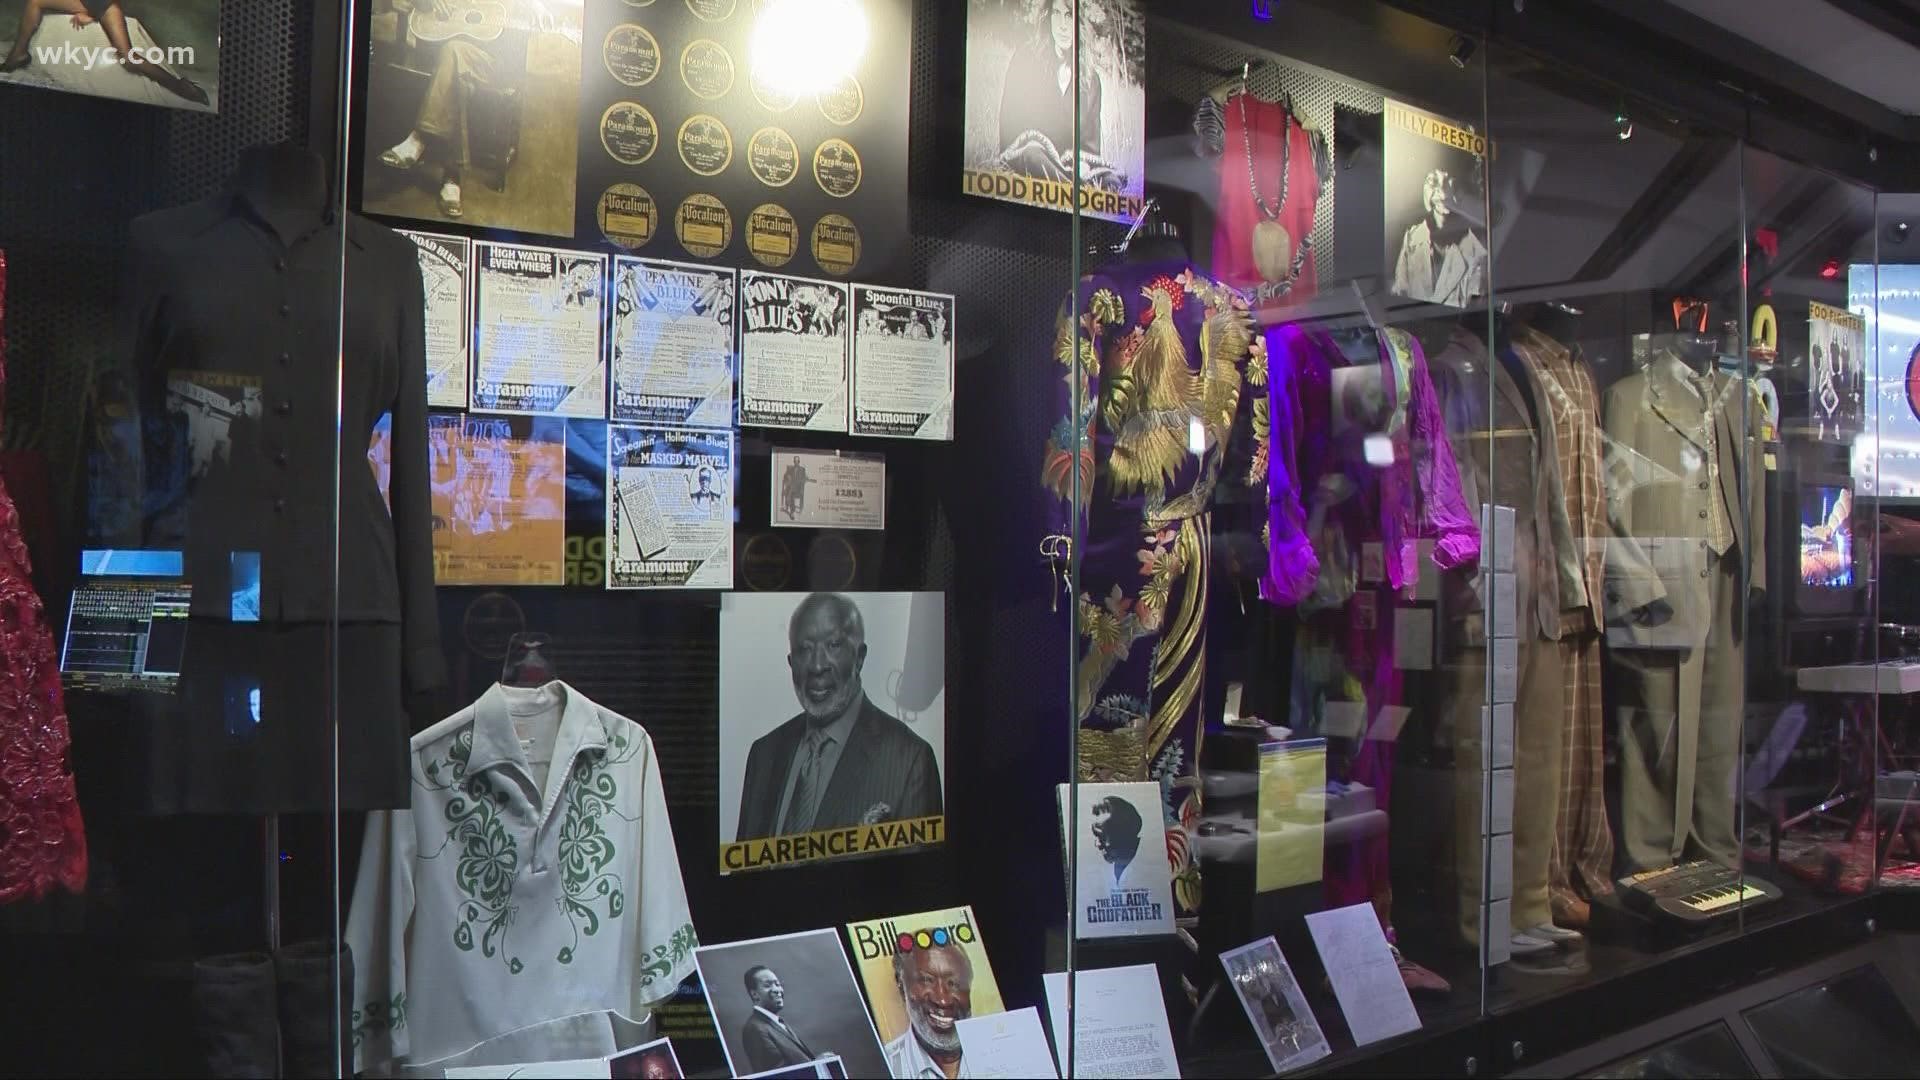 Look at the Rock & Roll Hall of Fame inductees exhibit